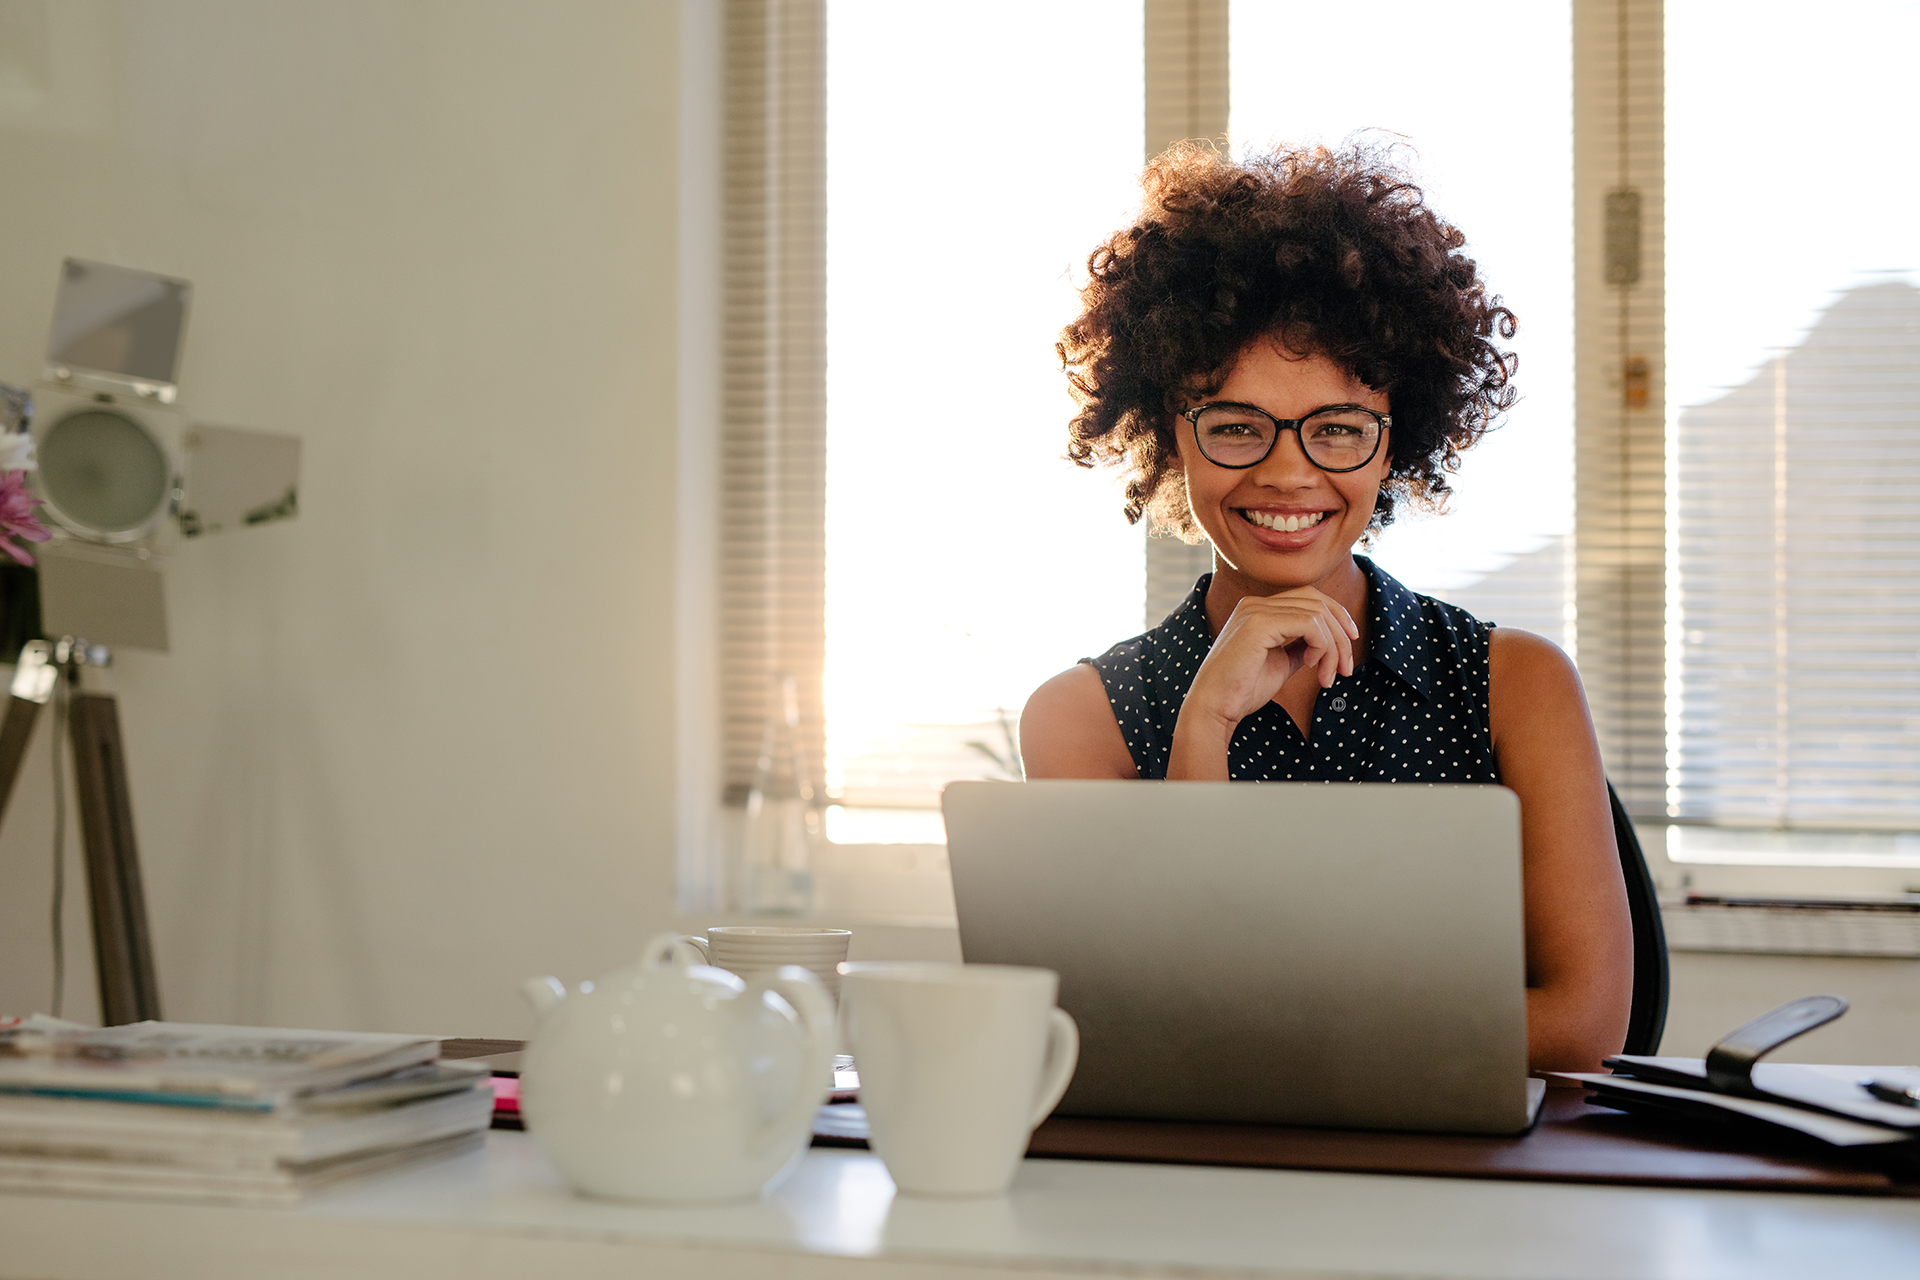 Background banner image of woman smiling in front of a laptop.